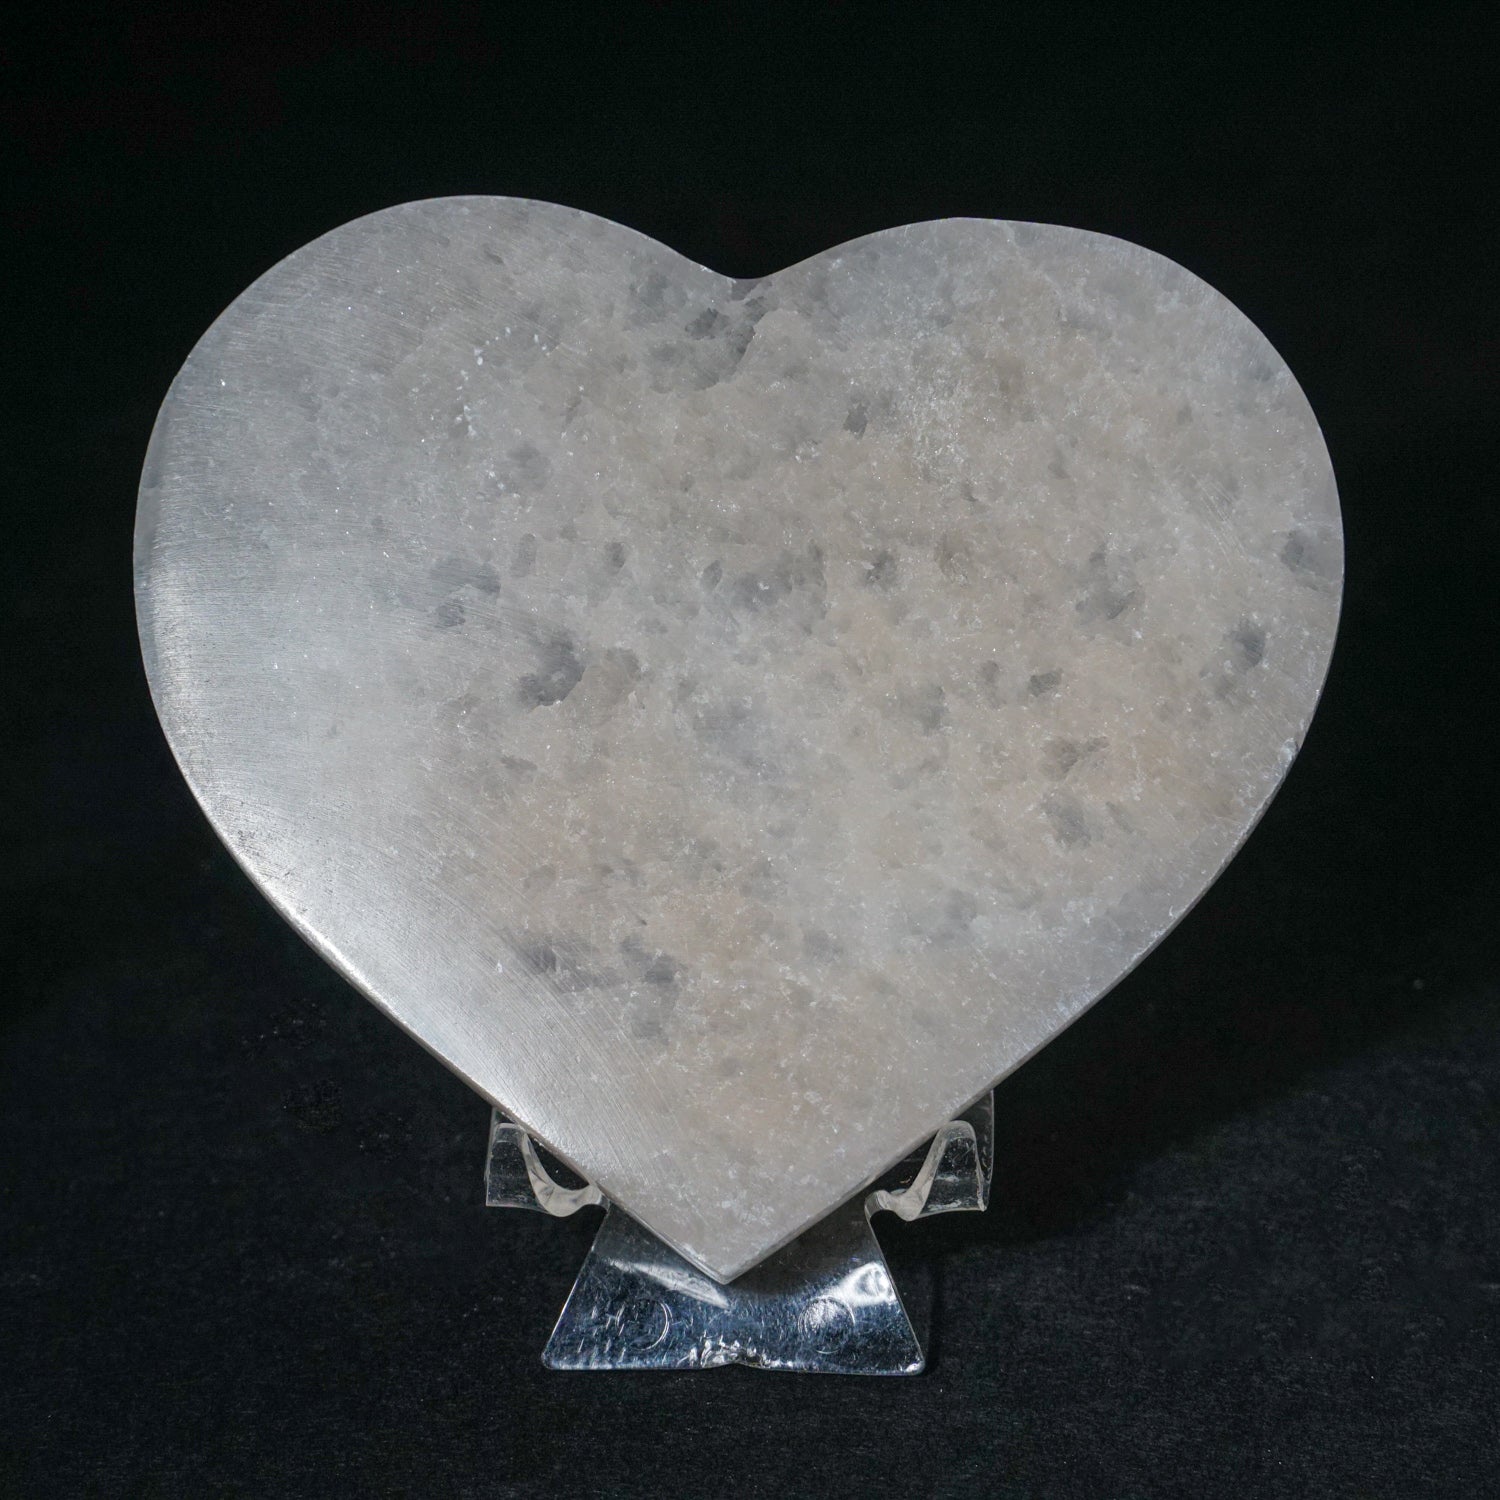 Genuine Polished Selenite Crystal Heart from Morocco (107.9 grams)